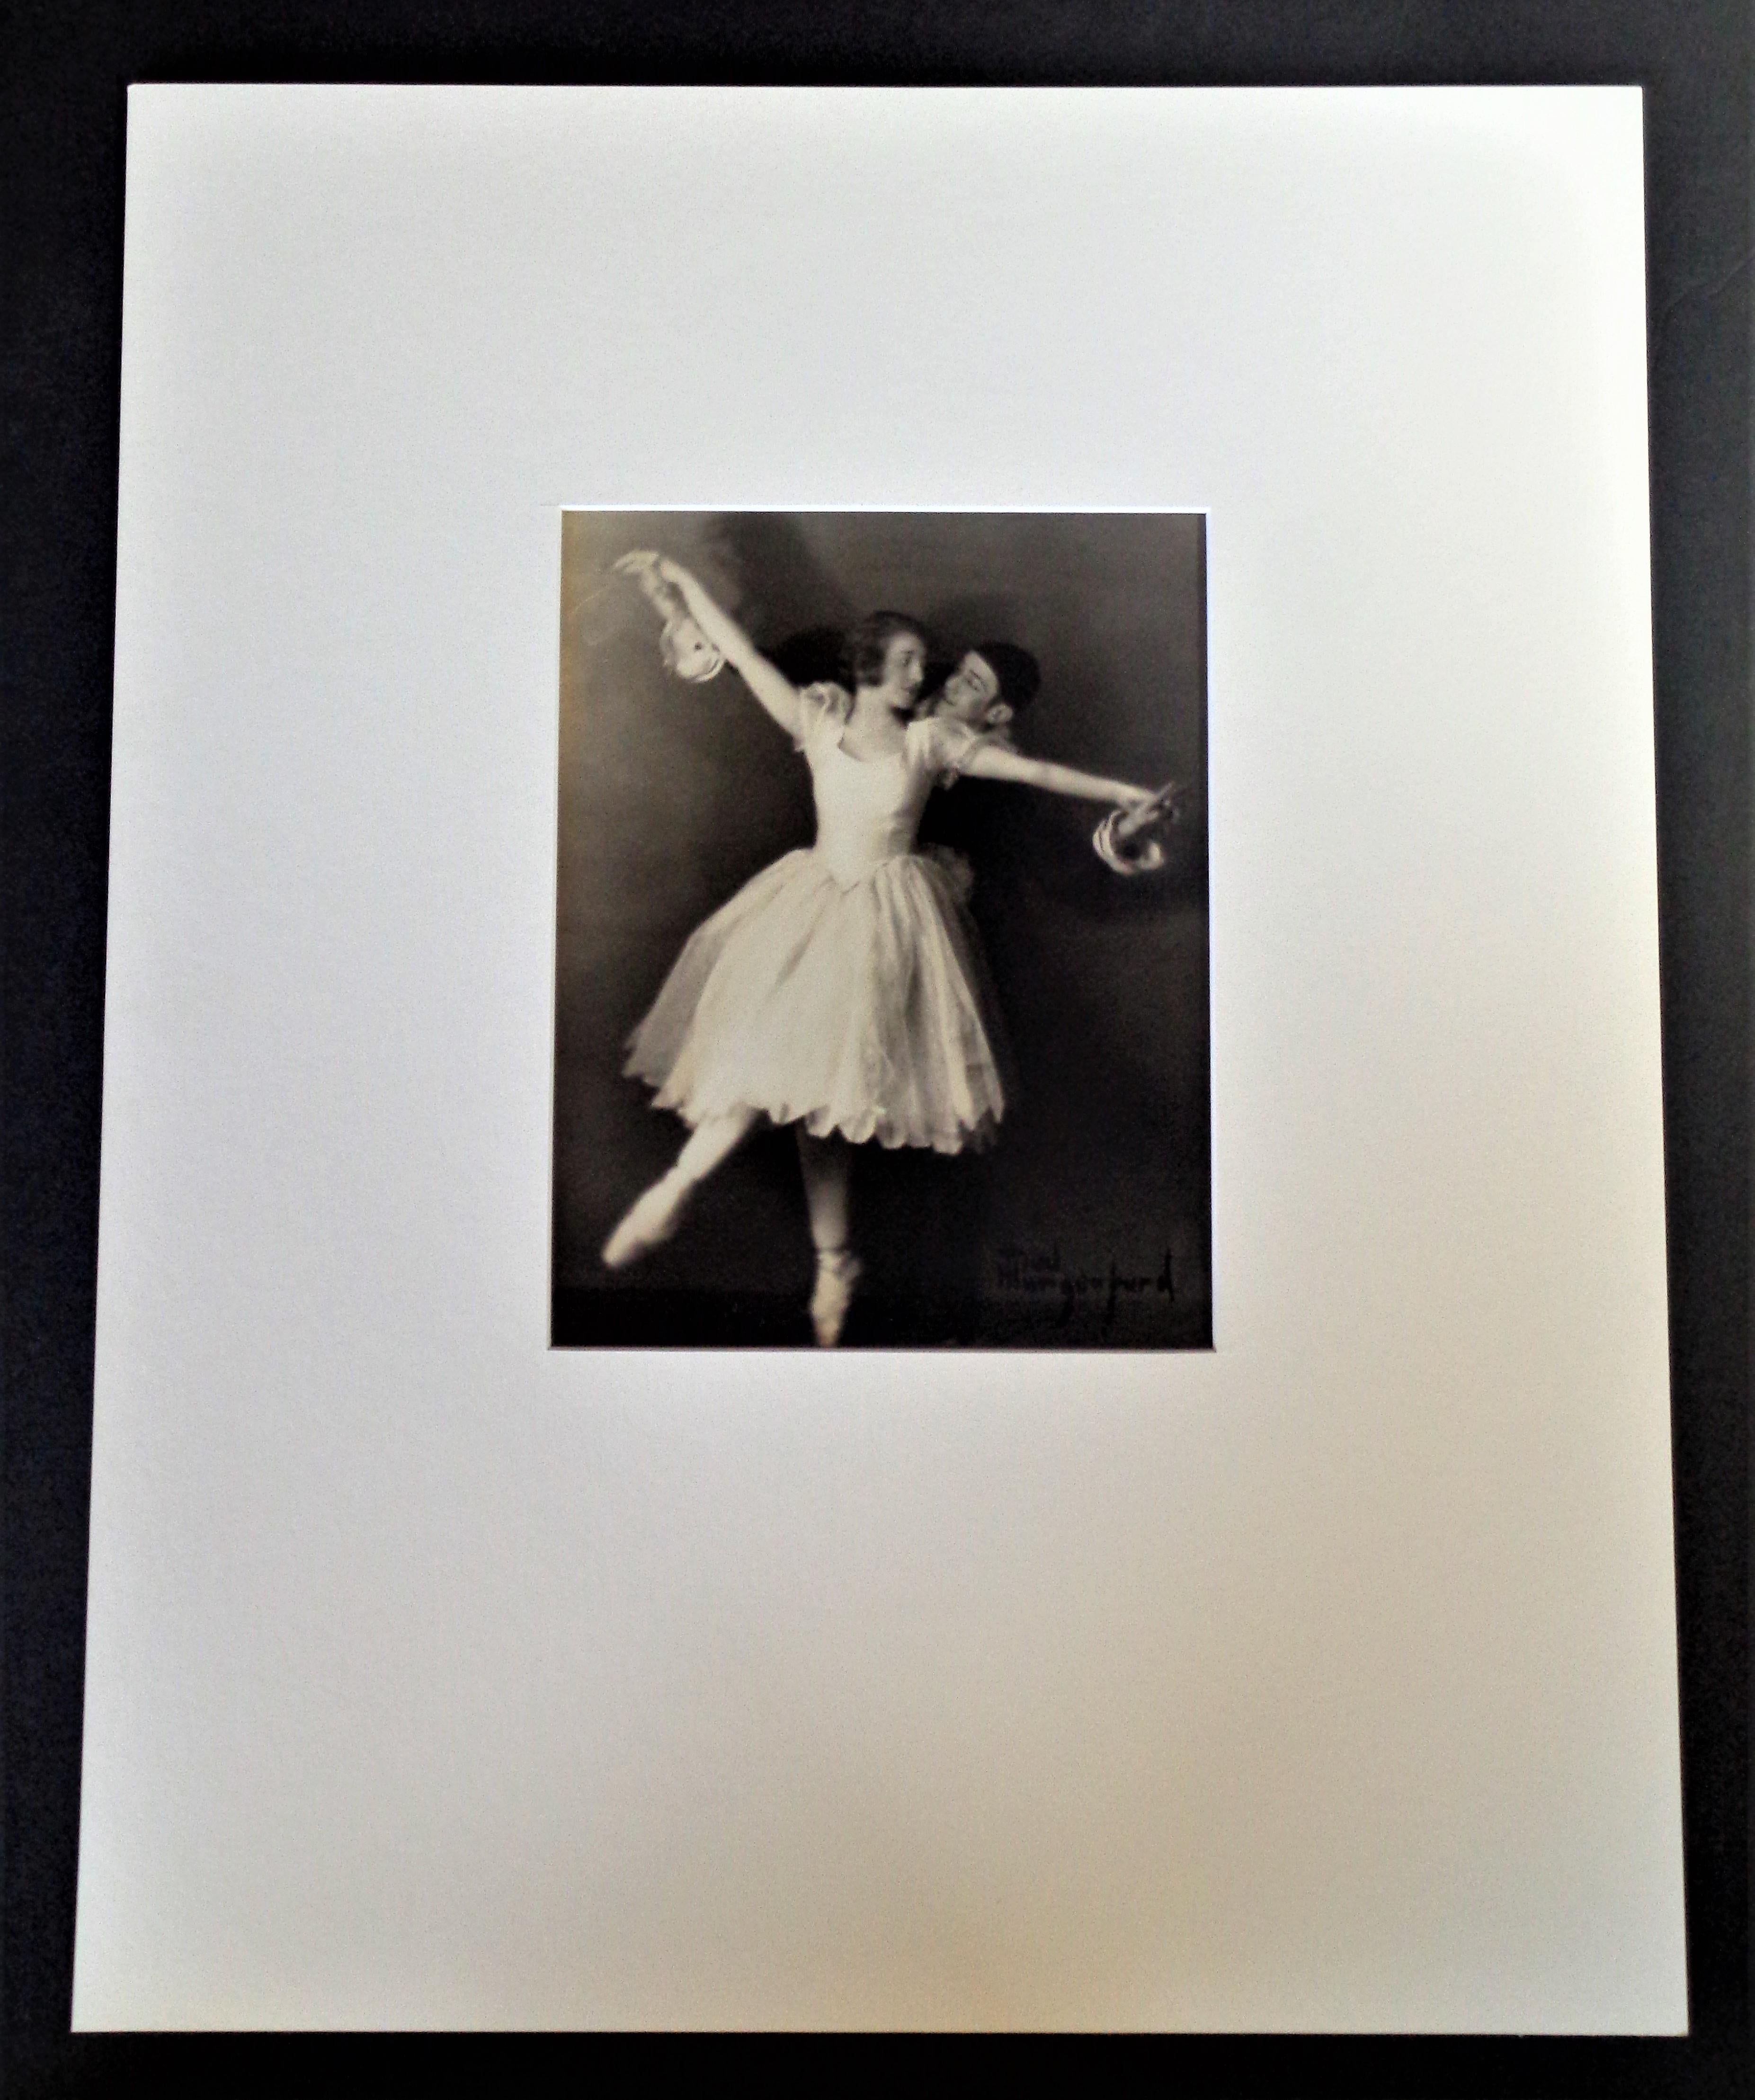 Pictorialist gelatin silver print sepia tone photograph by Ned Hungerford, Rochester NY ( hand ink signed lower right ) theatrical subject matter female and male ballet dancers. Professionally matted. Circa 1900-1910. Look at all pictures and read